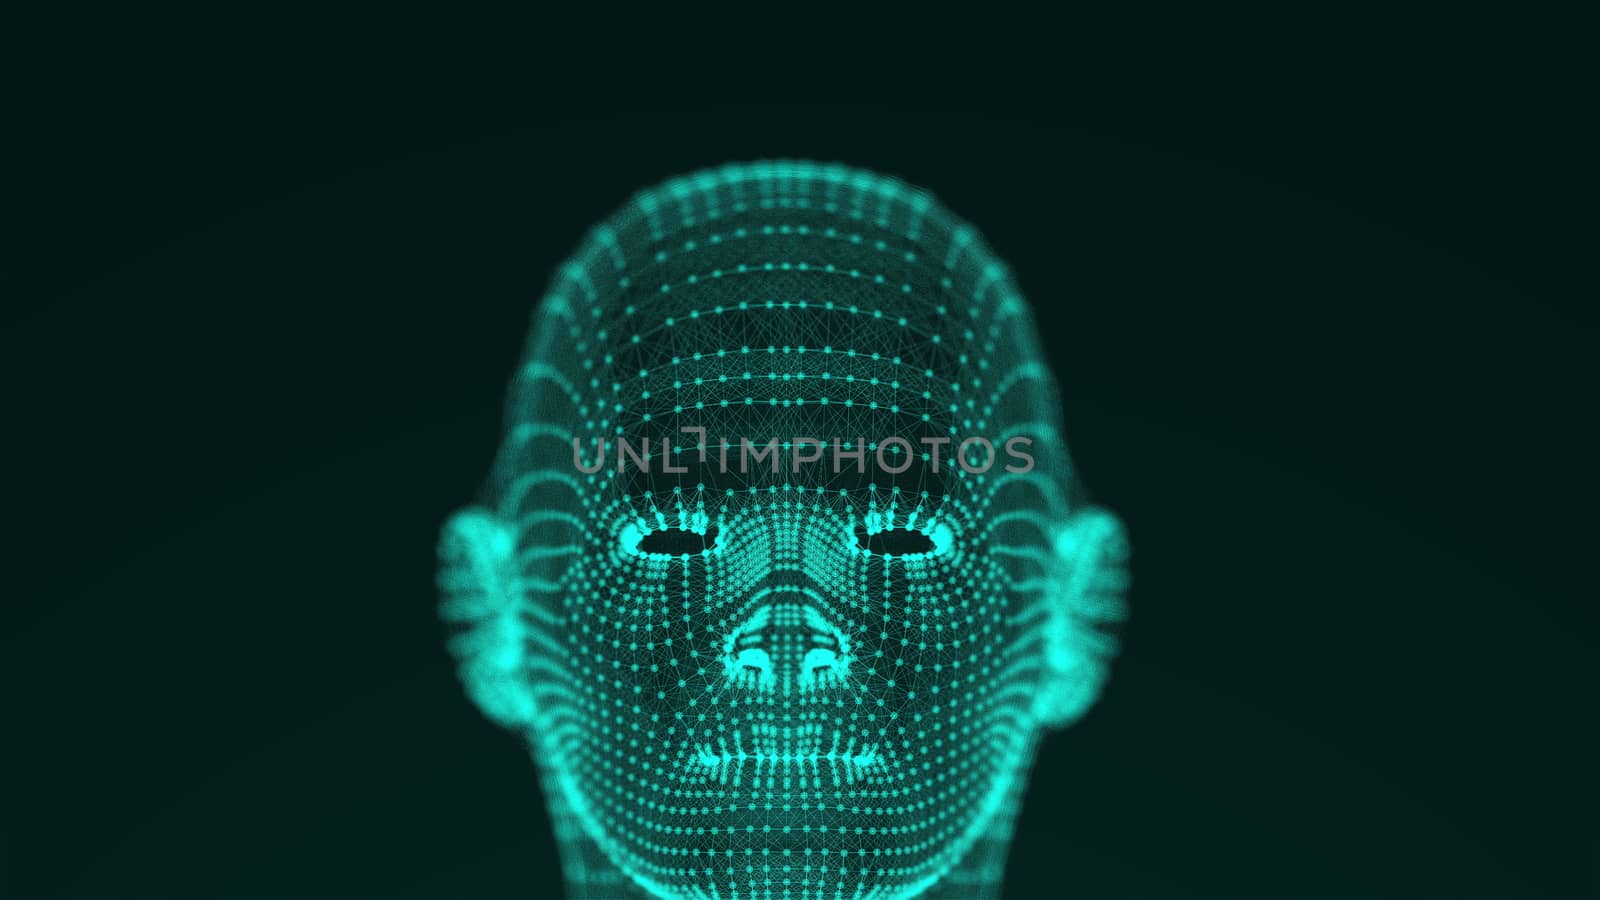 Many points connected by thin threads form a bright futuristic shape of the head of a person or a robot on black background. Computer generated 3d rendering